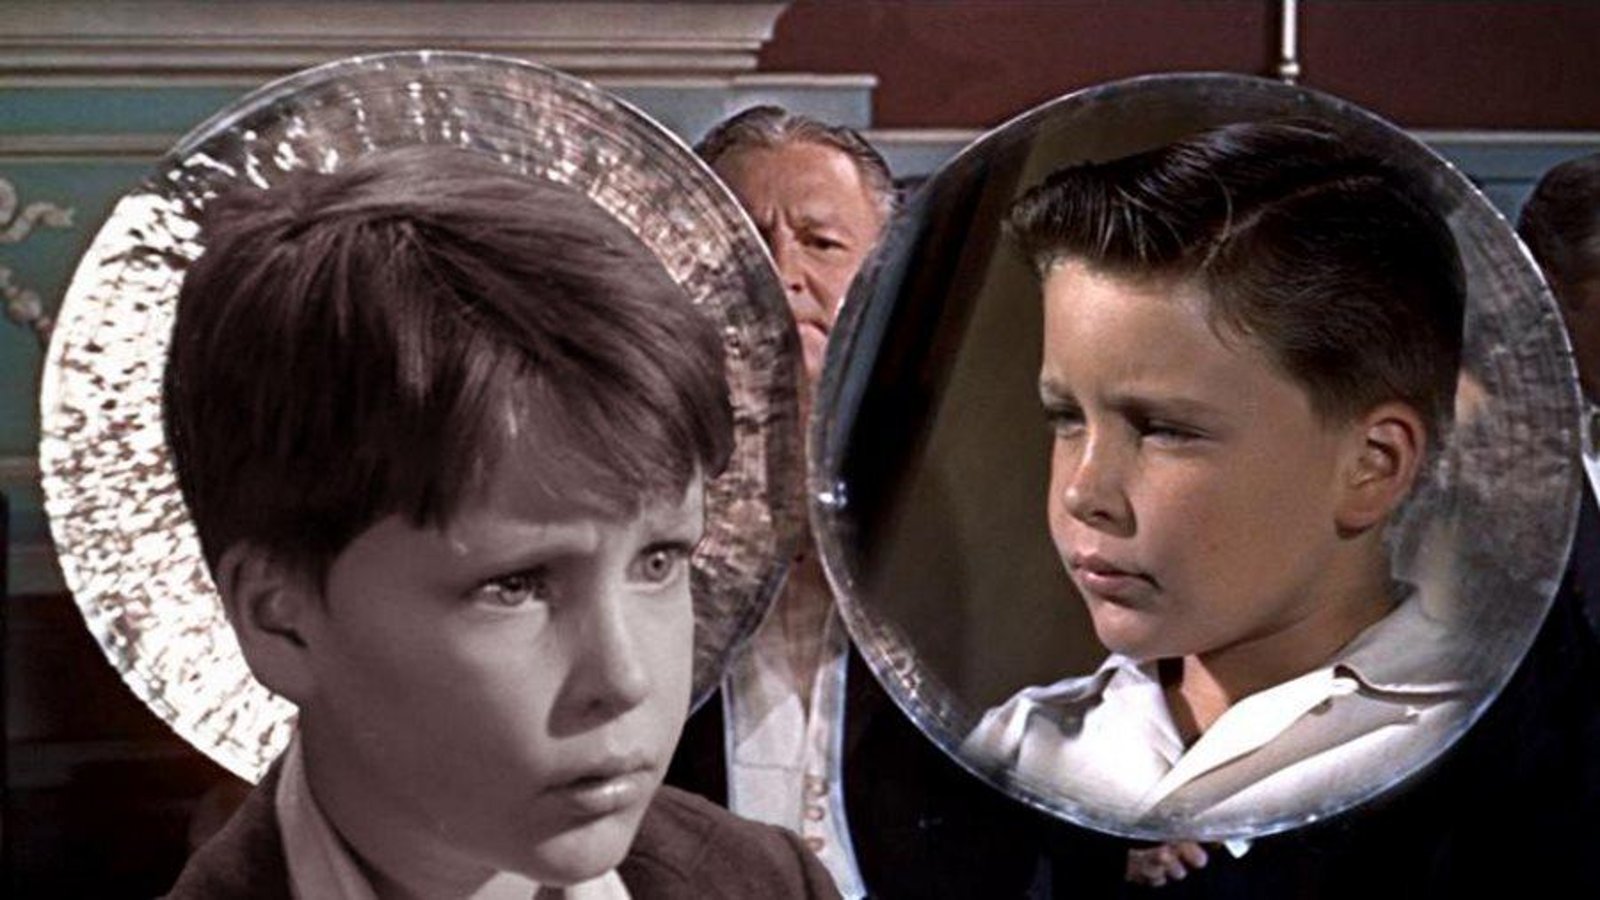 Chris Olsen - The Boy Who Cried - The Life and Career of A Child Actor